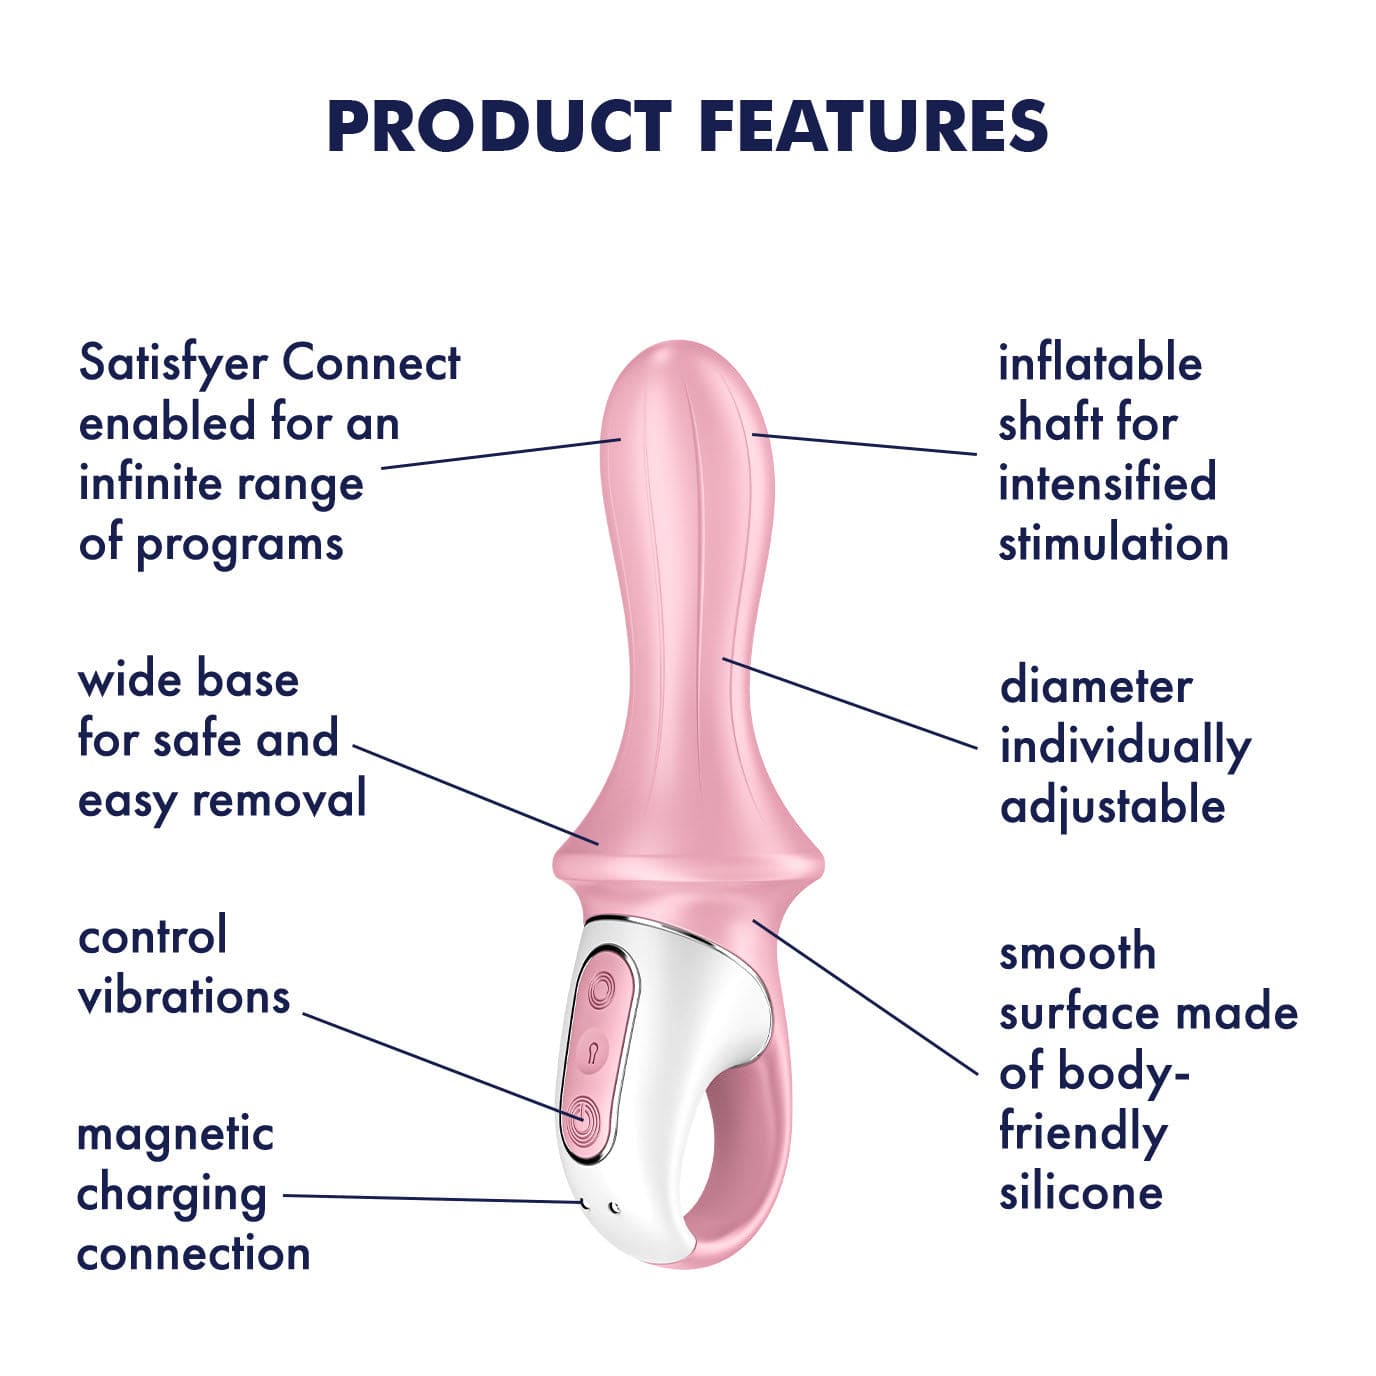 Satisfyer - Air Pump App-Controlled Booty 5 Prostate Massager (Pink) Prostate Massager (Vibration) Rechargeable 4061504038551 CherryAffairs